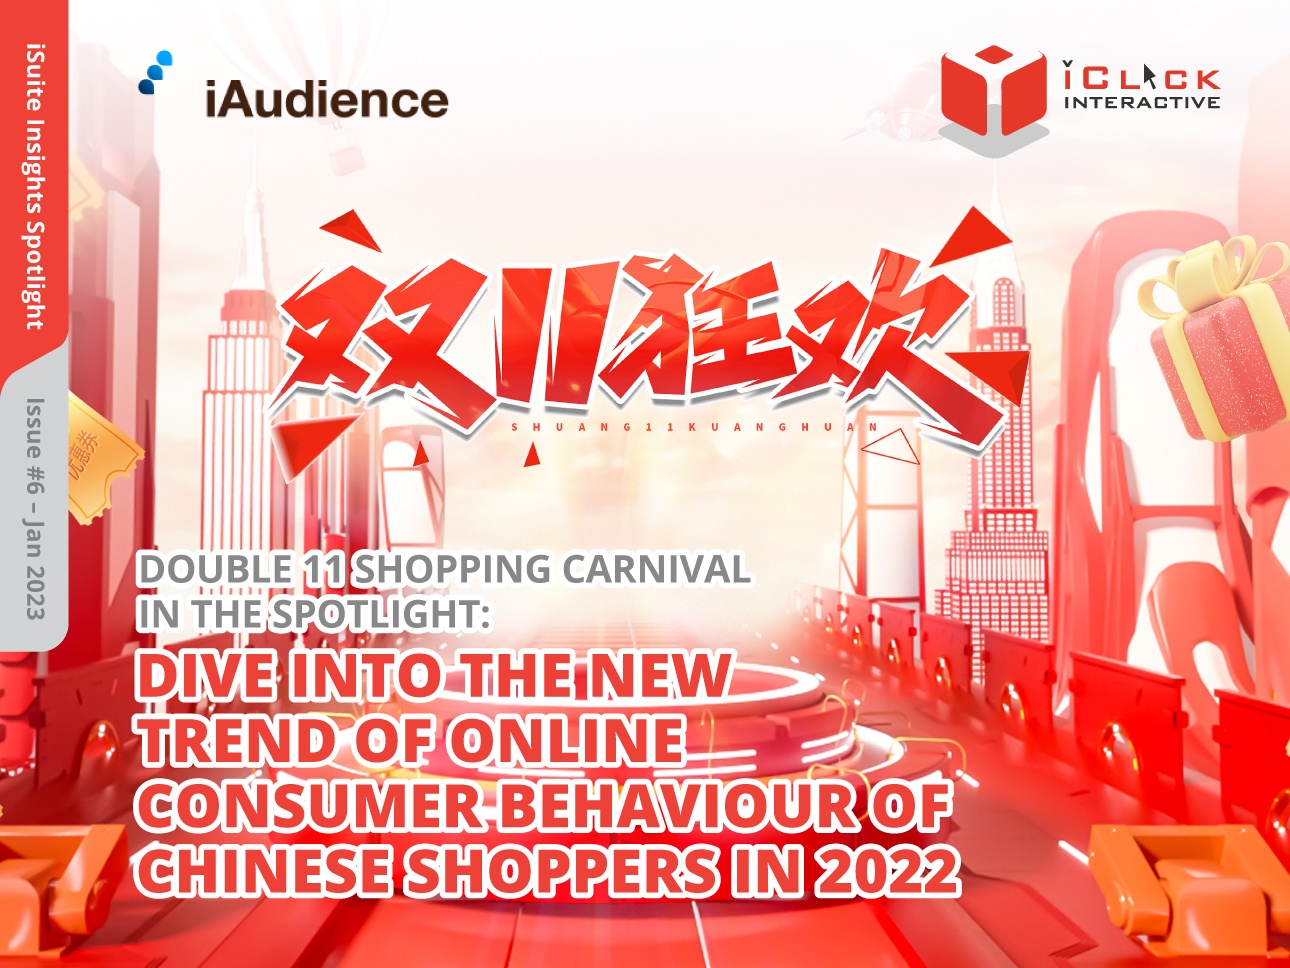 iSuite Insights Spotlight – Issue #6 Dive into the New Trend of Consumer Behaviours of Chinese Shoppers in 2022